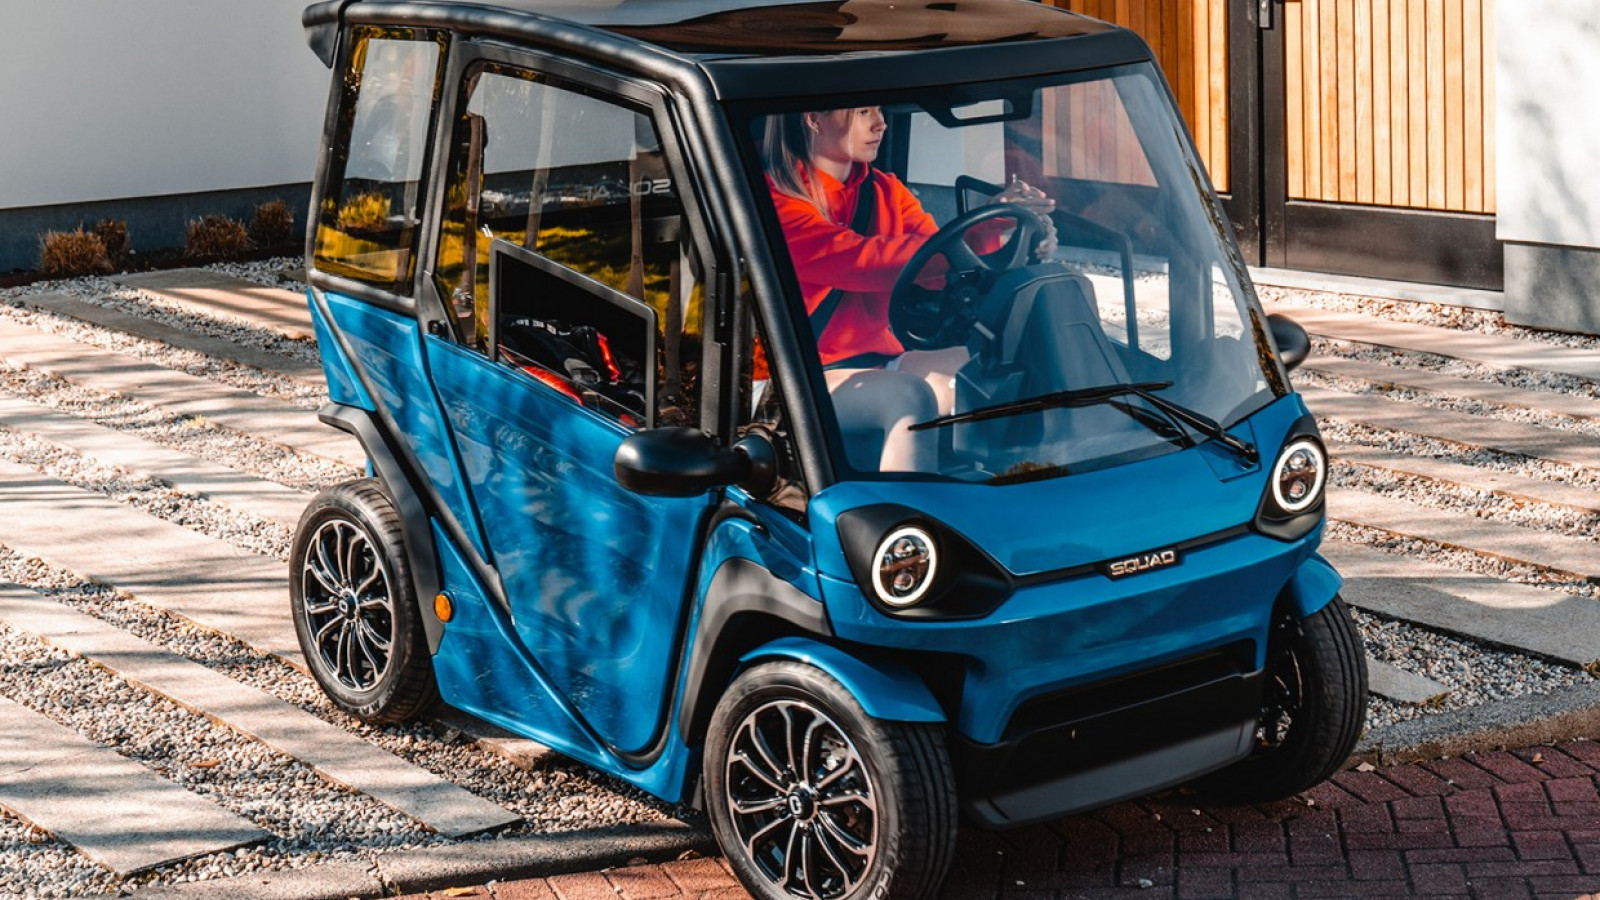 this super-narrow electric car looks like an odd adult-sized toy